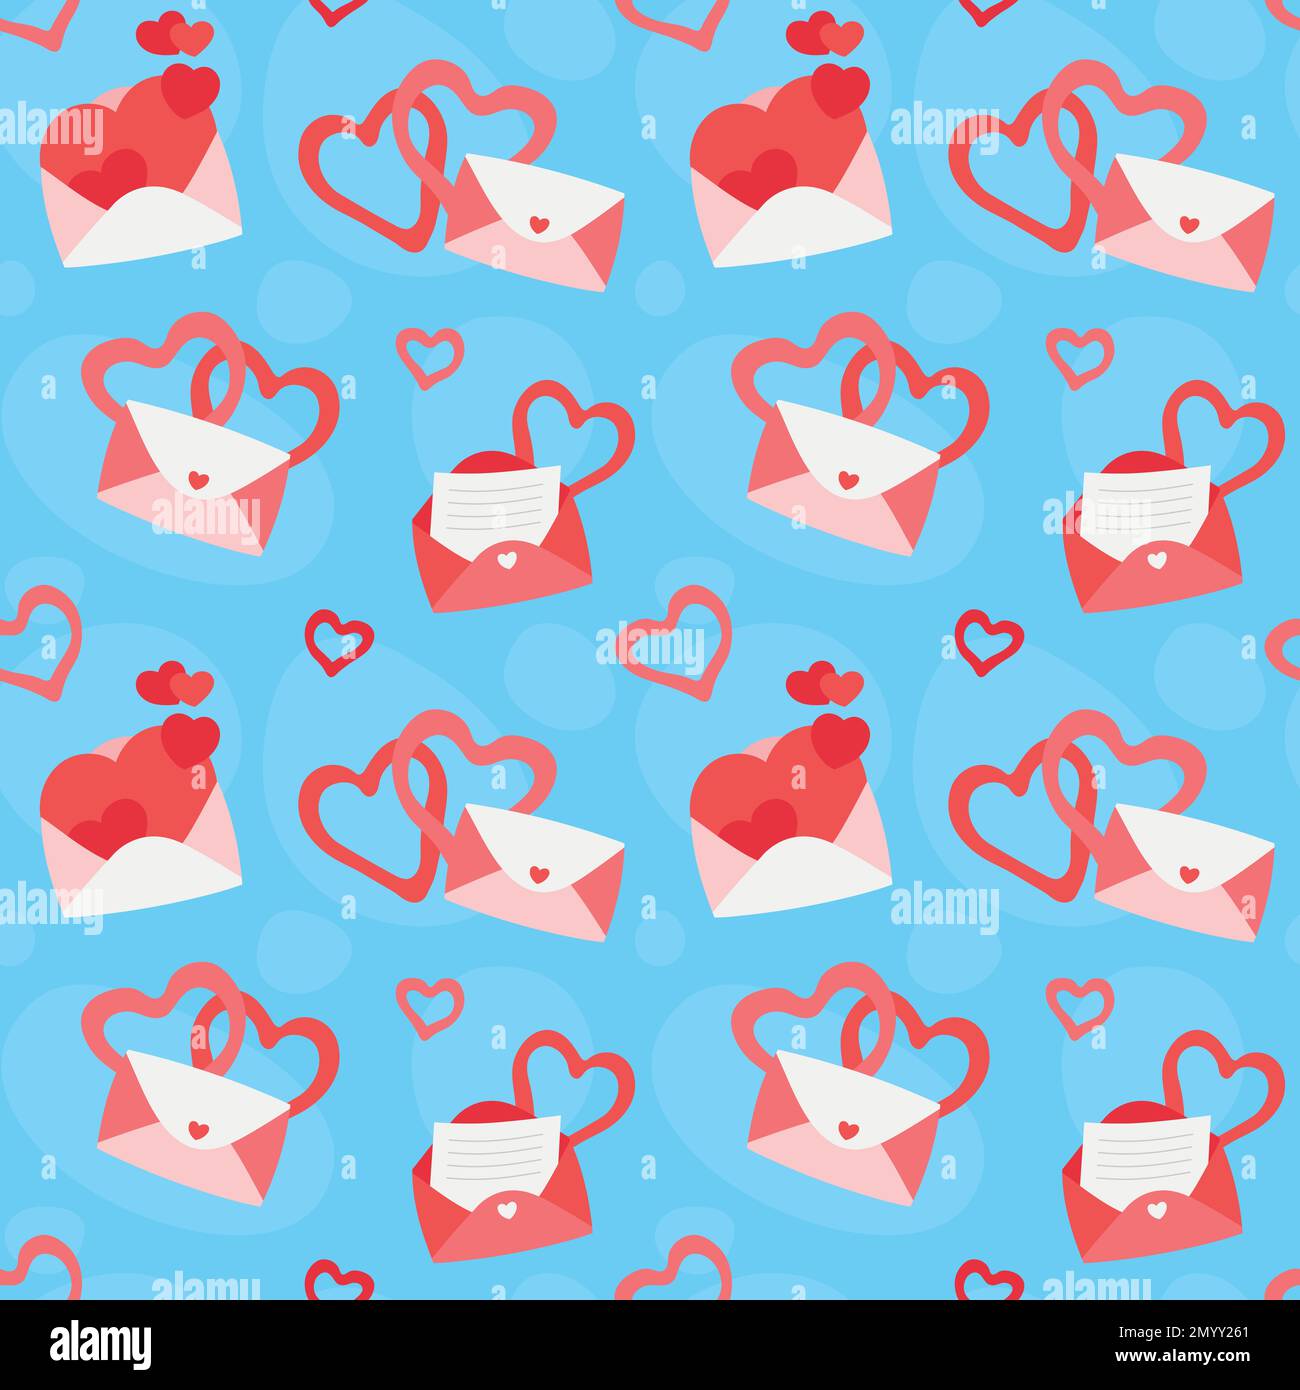 Colorful repetitive pattern background of love and relationship, Valentine's day related envelopes and letters, made of simple vector illustrations. Stock Vector